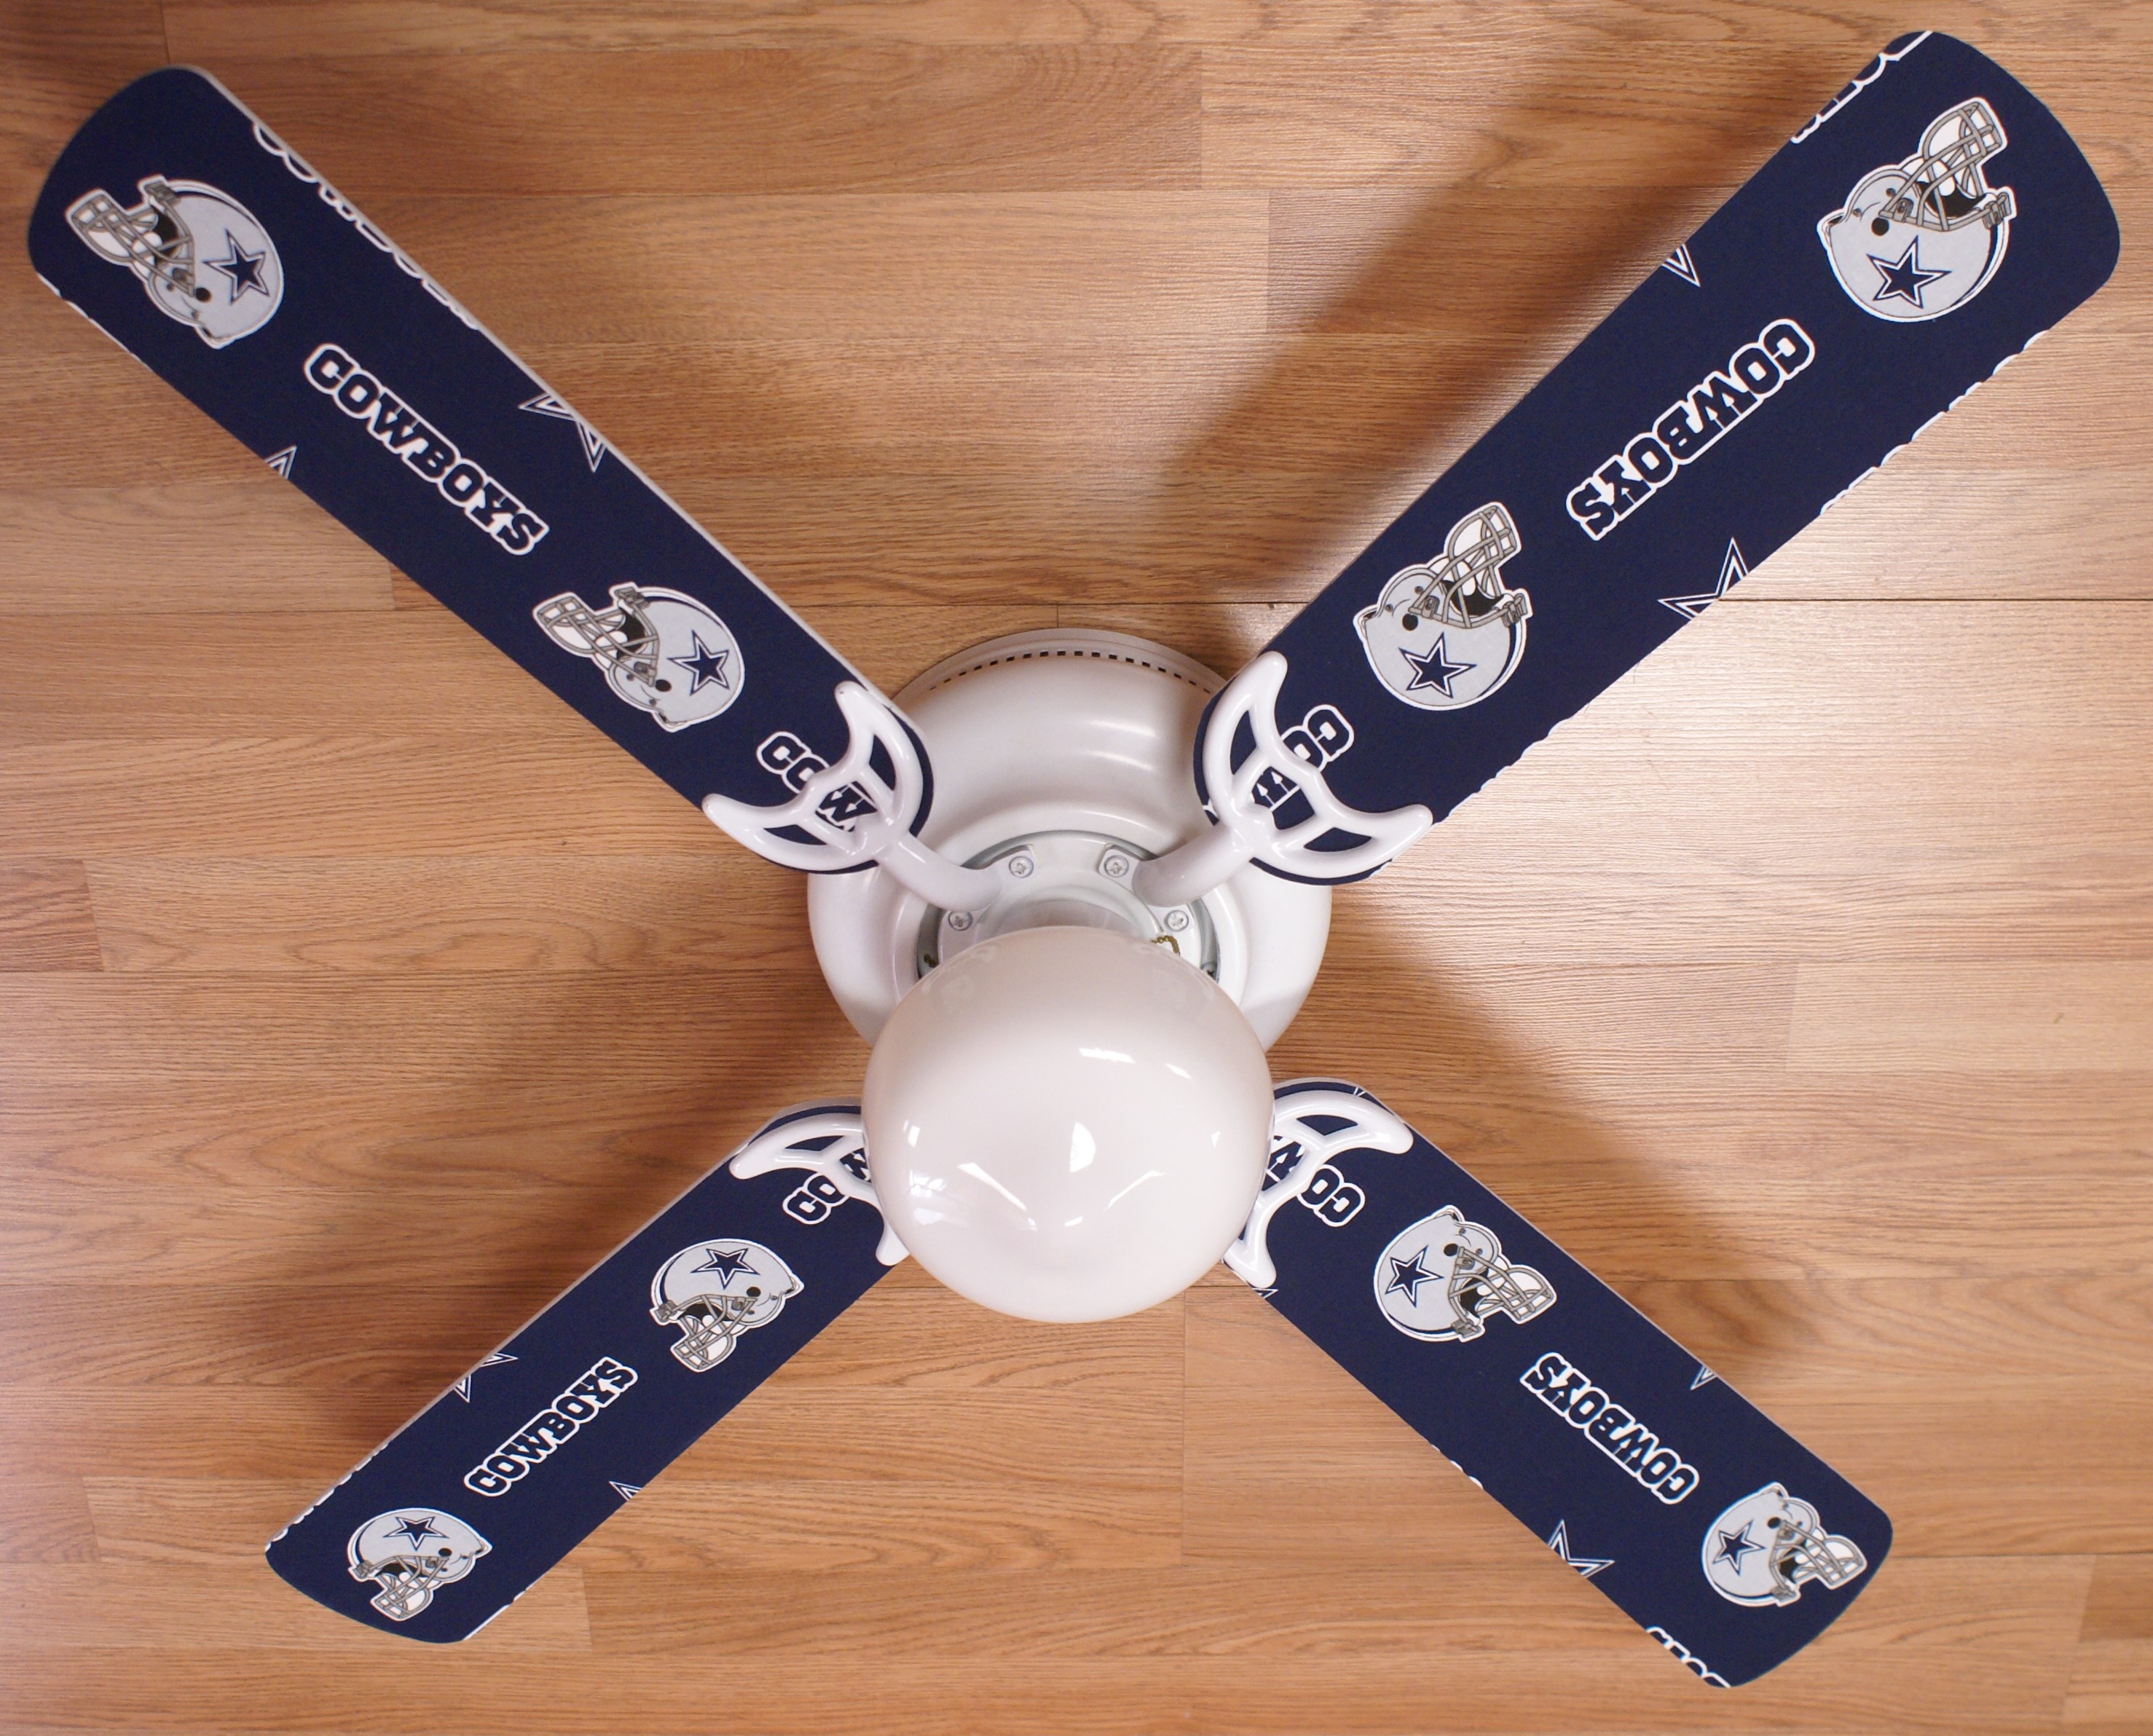 Picture of Ceiling Fan Designers 42SET-NFL-DAL NFL Dallas Cowboys Football 42 In. Ceiling Fan Blades Only